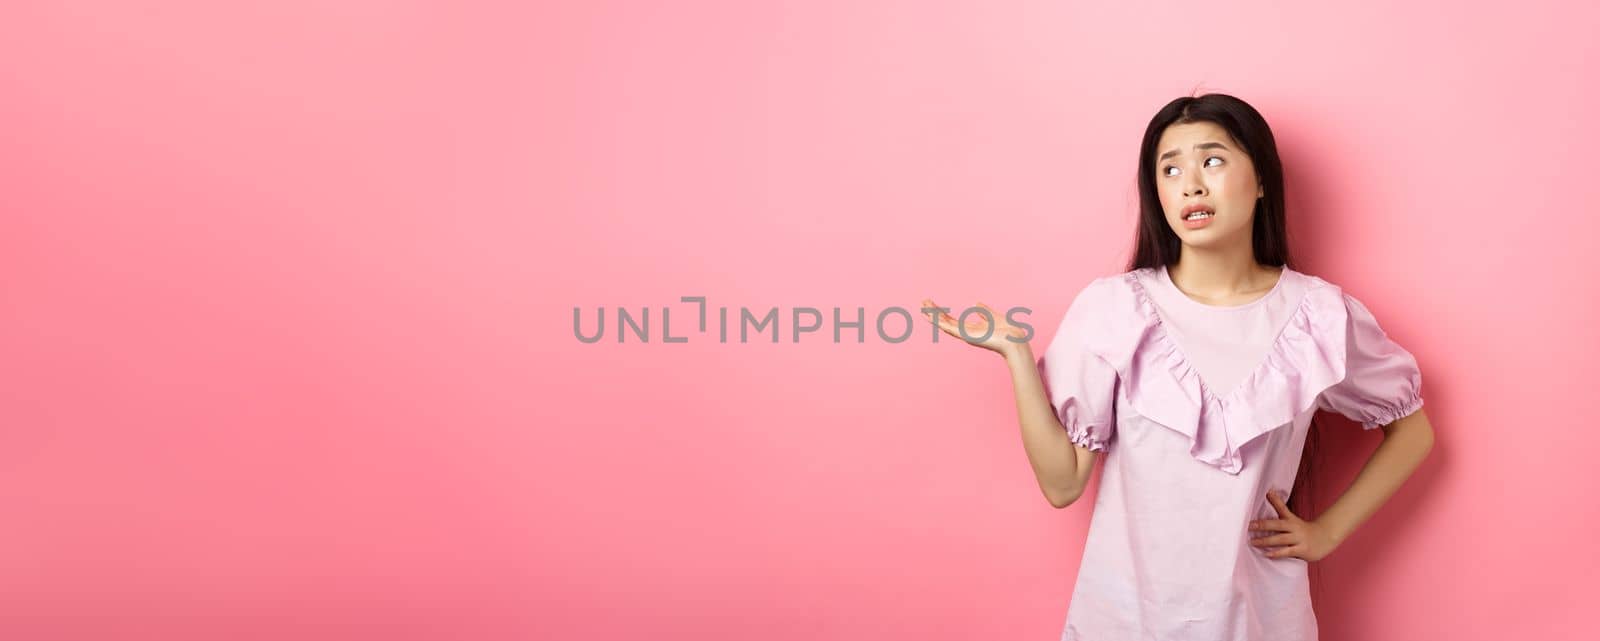 Ignorant asian woman look away and shrugging careless, raising hand up so what gesture, standing unbothered on pink background.